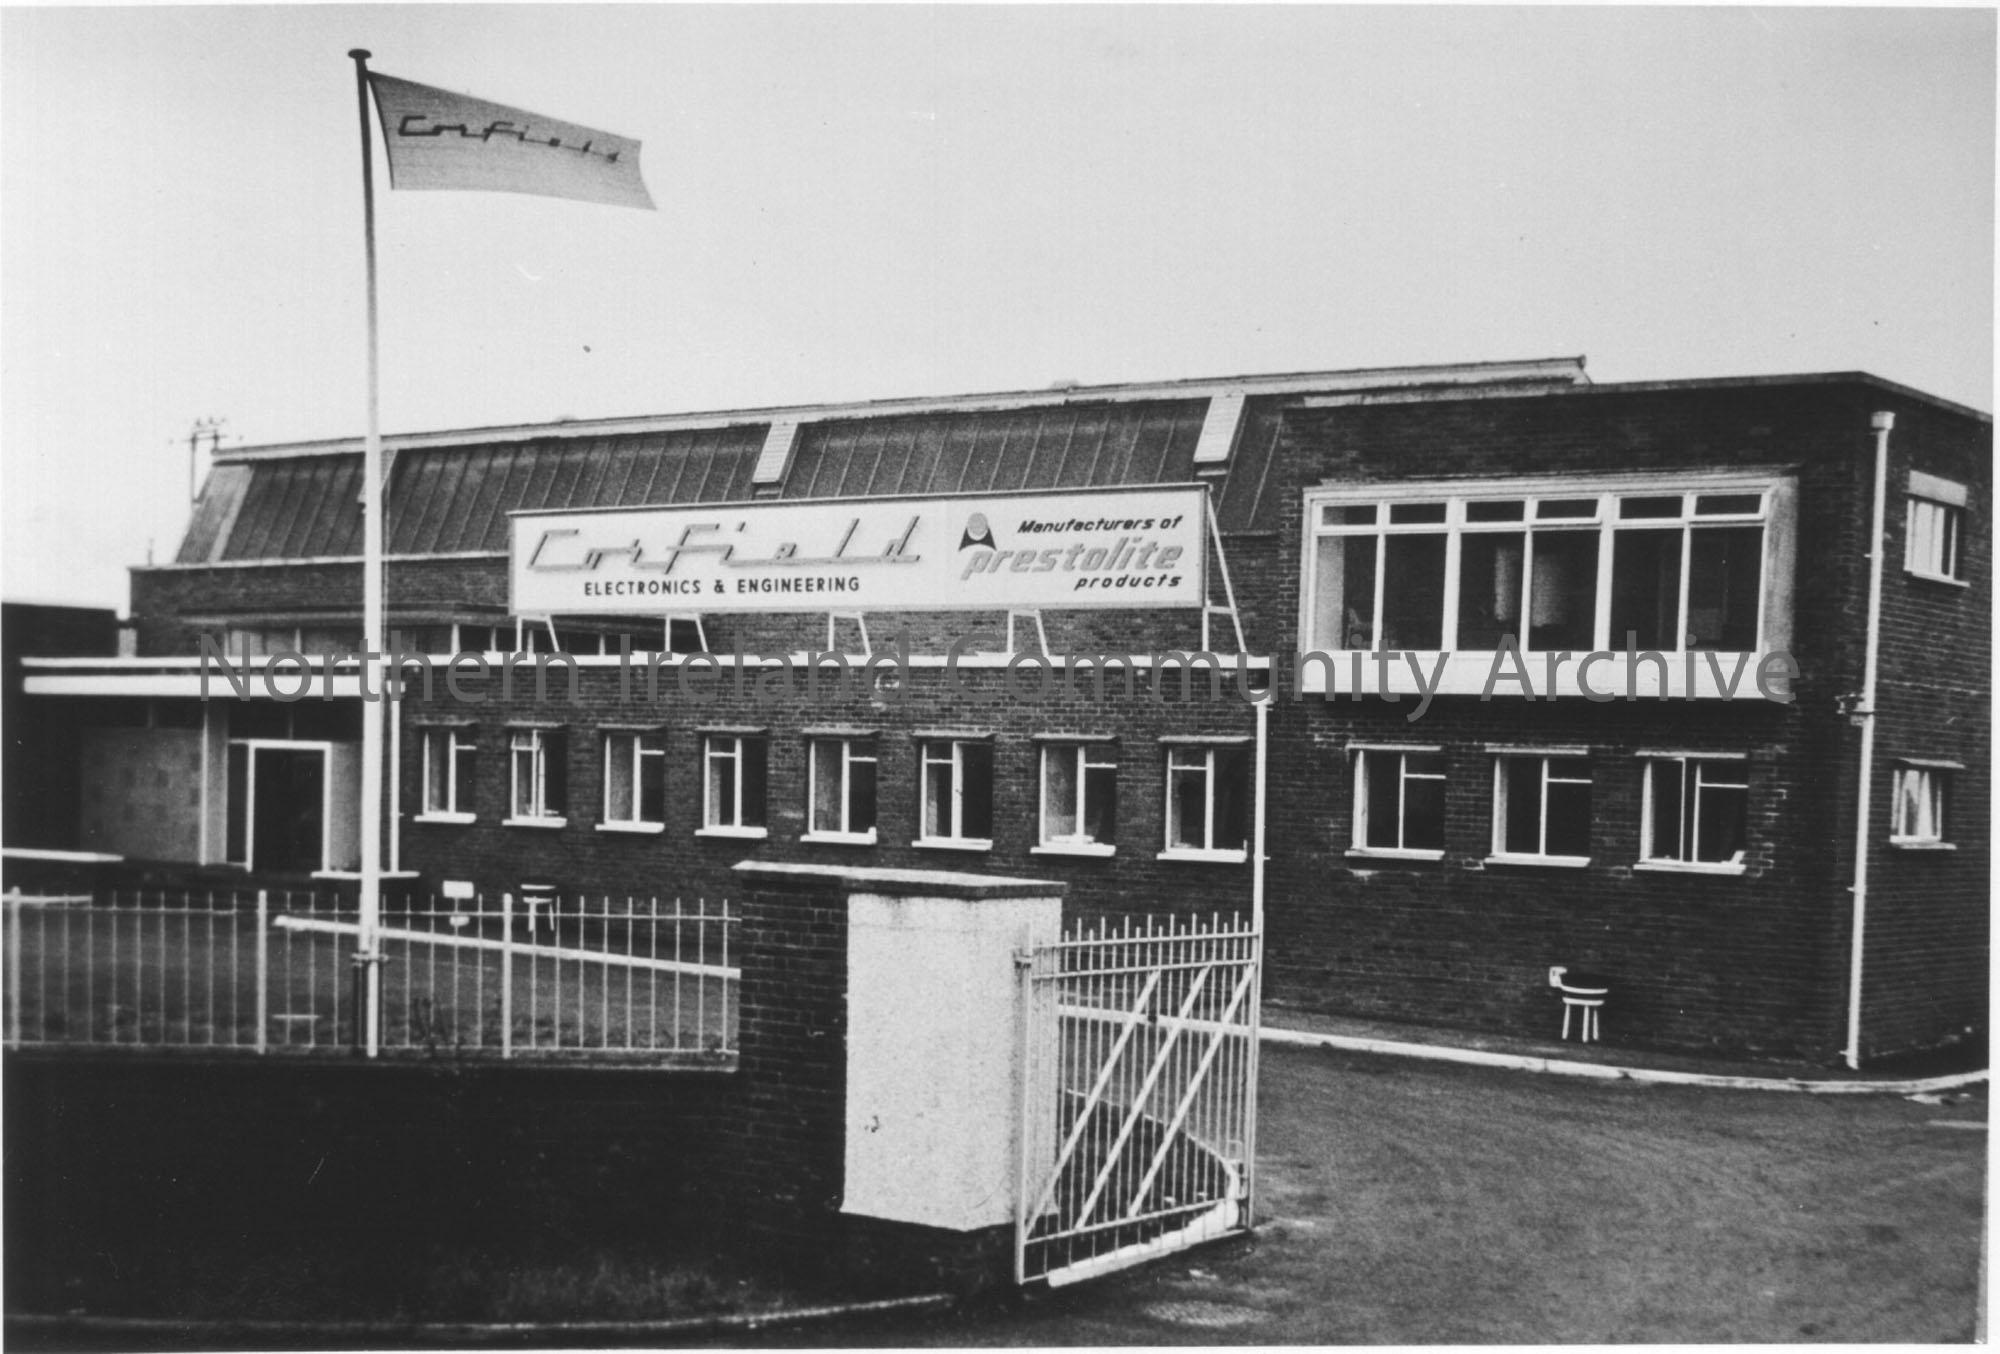 Photograph of Front view of Corfield Factory at Ballyema Road. Sign reads Manufacturers of Prestolite products, indicating the company was no longer i…